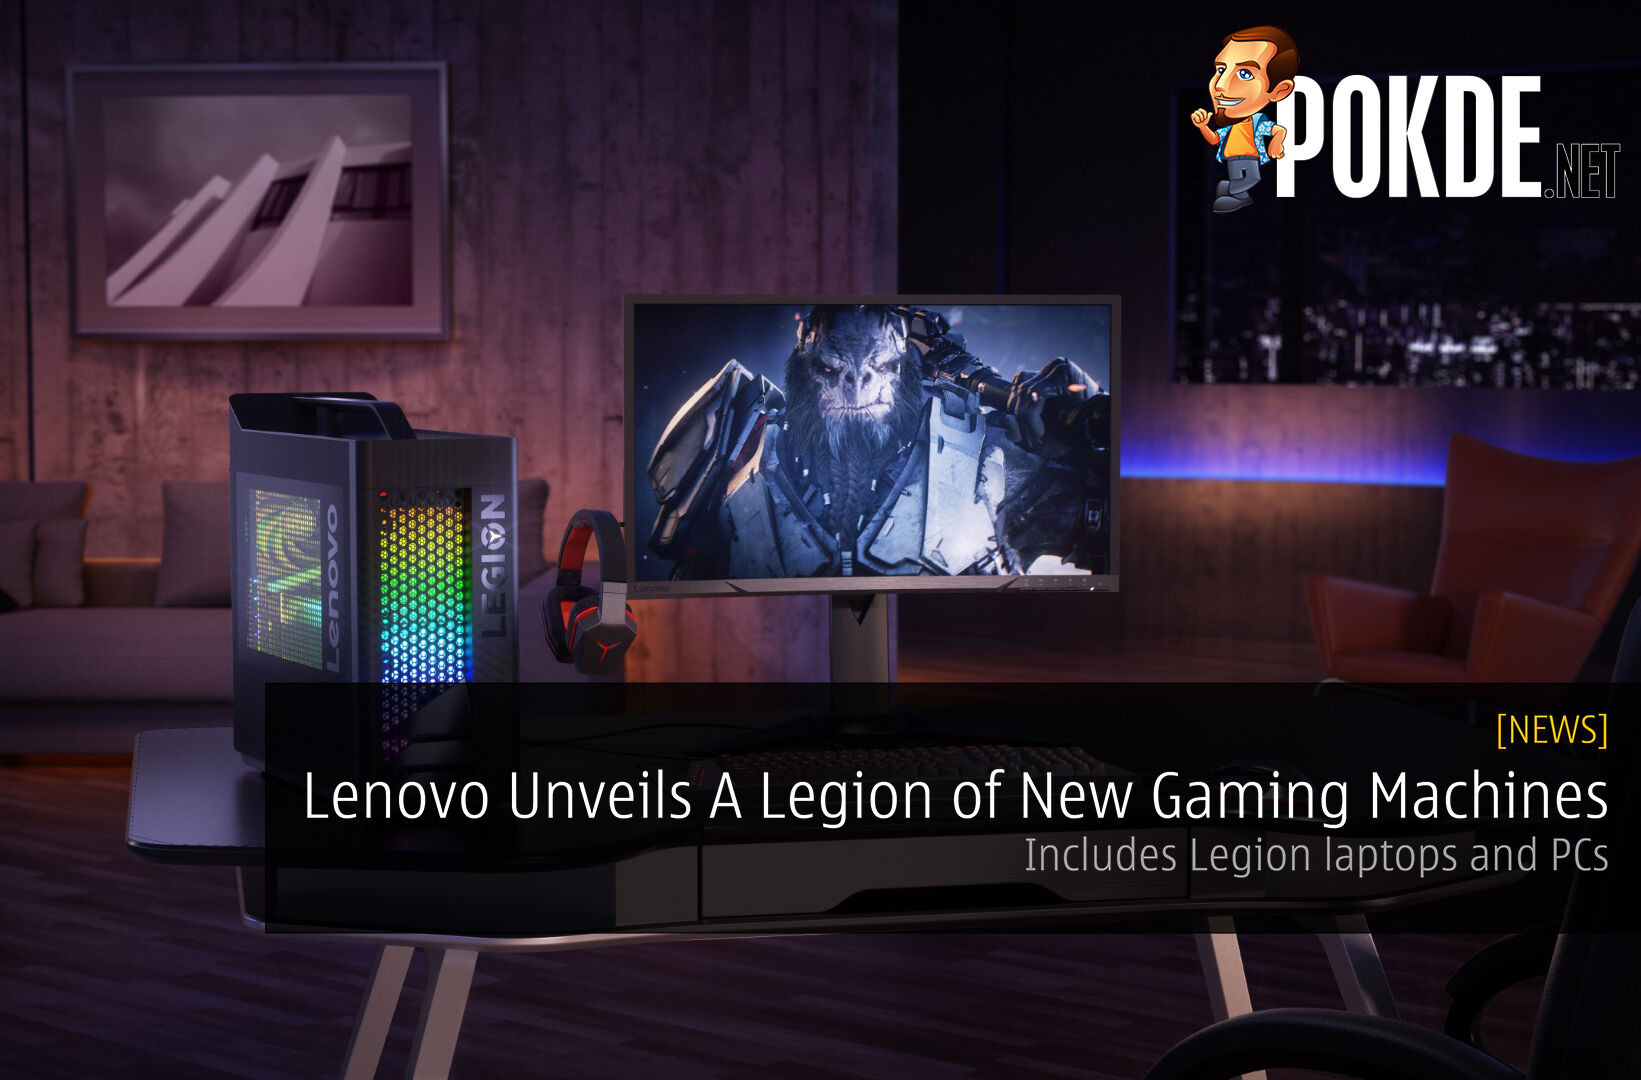 Lenovo Unveils A Legion of New Gaming Machines - Includes Legion laptops and PCs 33